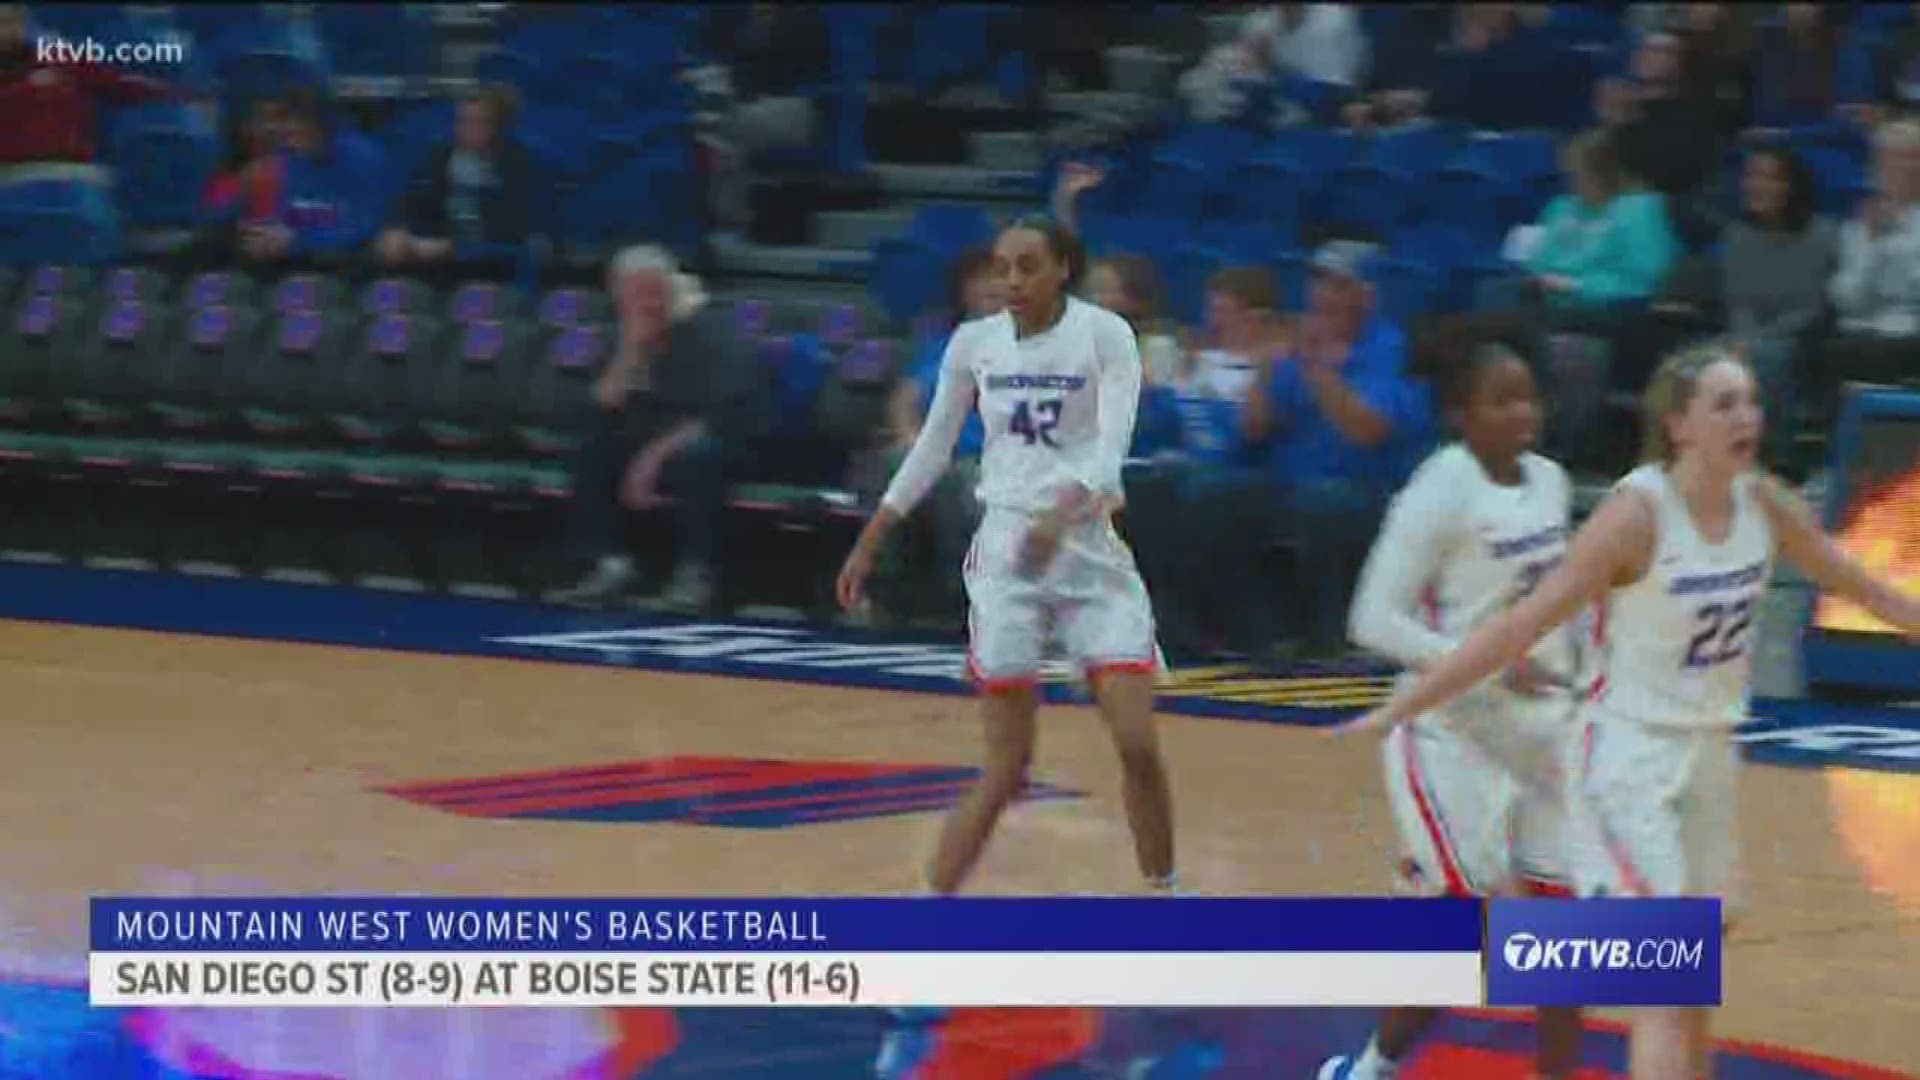 The Boise State women's basketball team rights the ship with an impressive 14-point win over the San Diego State Aztecs at home.